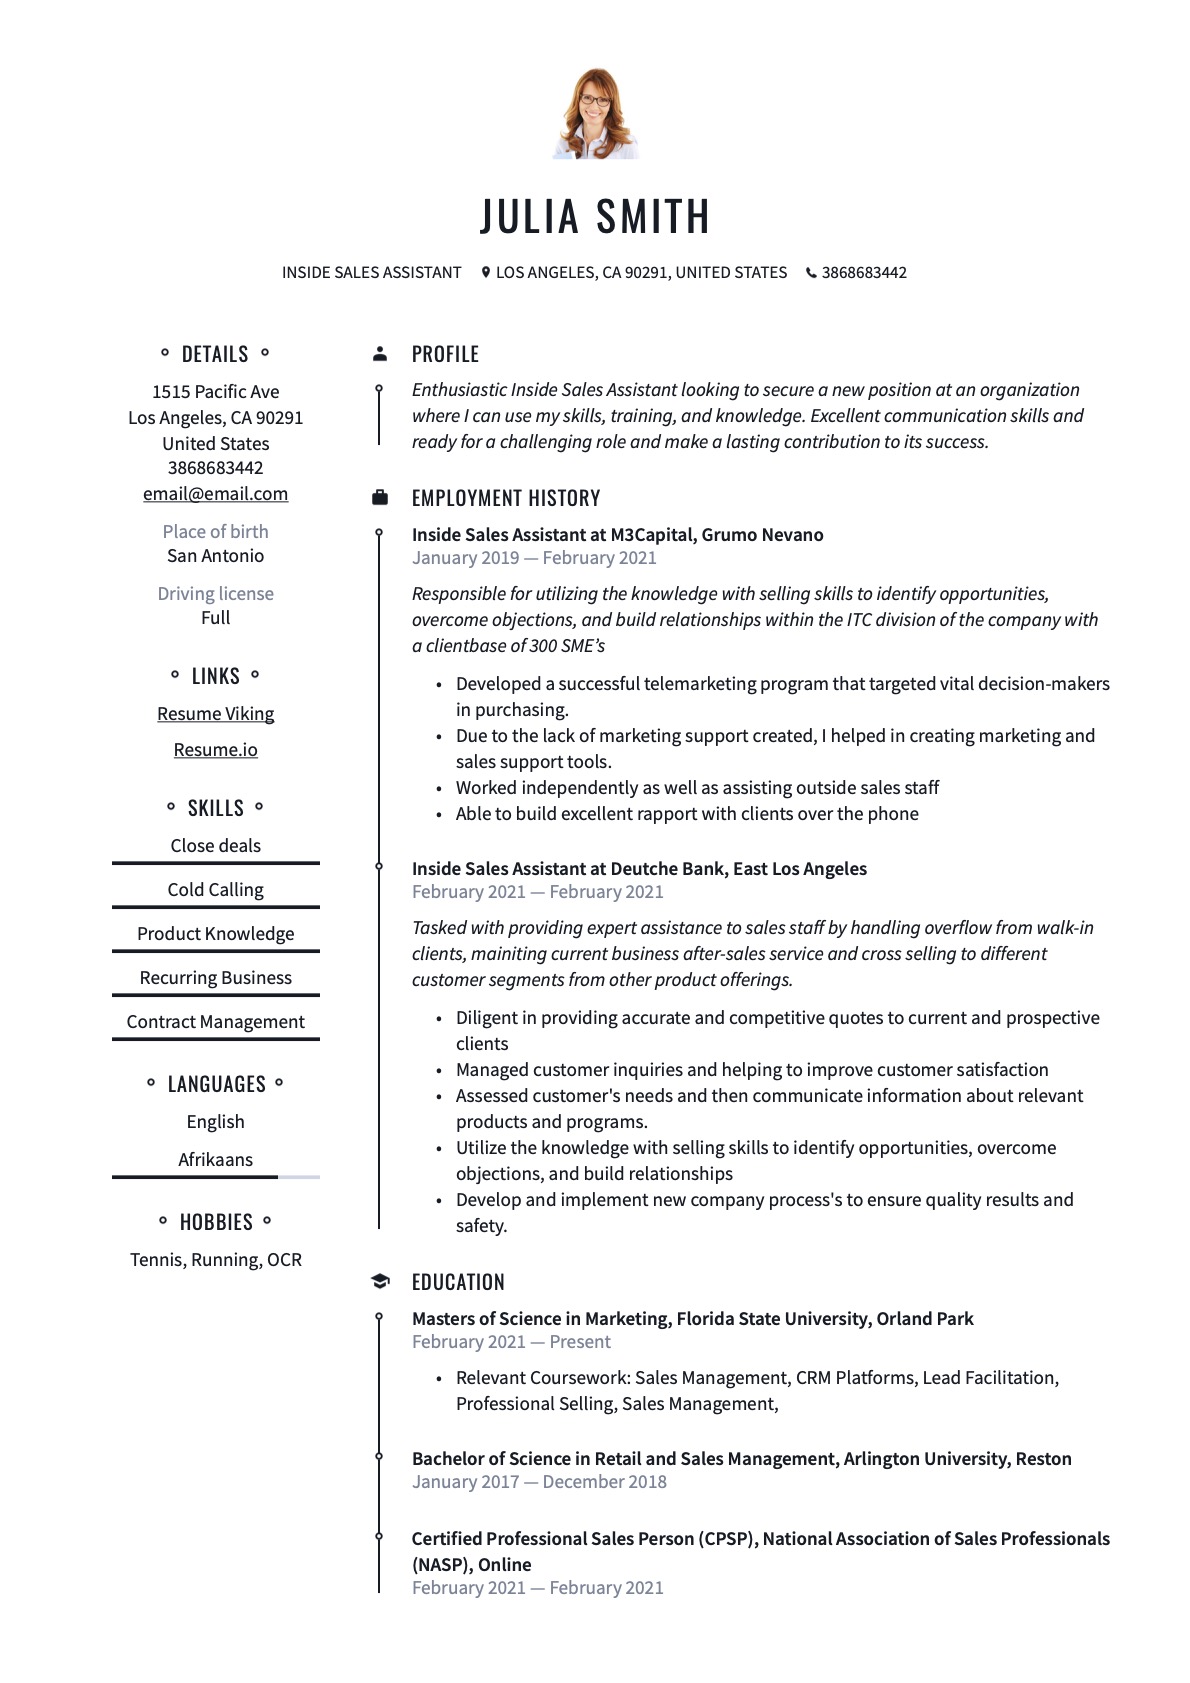 Example Resume Inside Sales Assistant-2